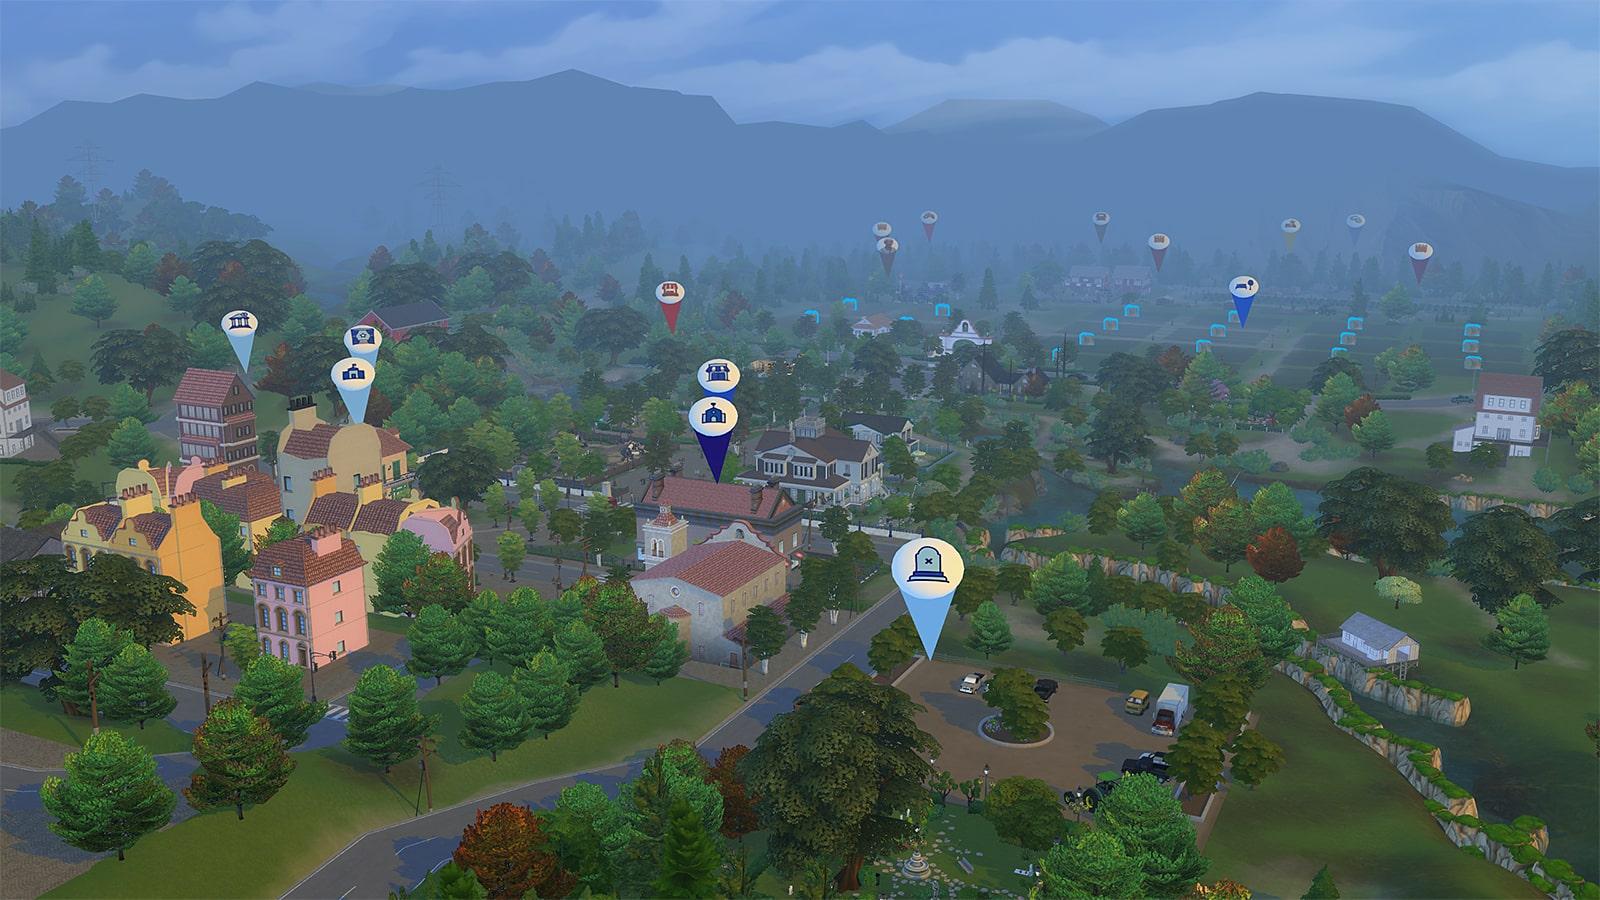 The world view of the Farmland mod in Sims 4